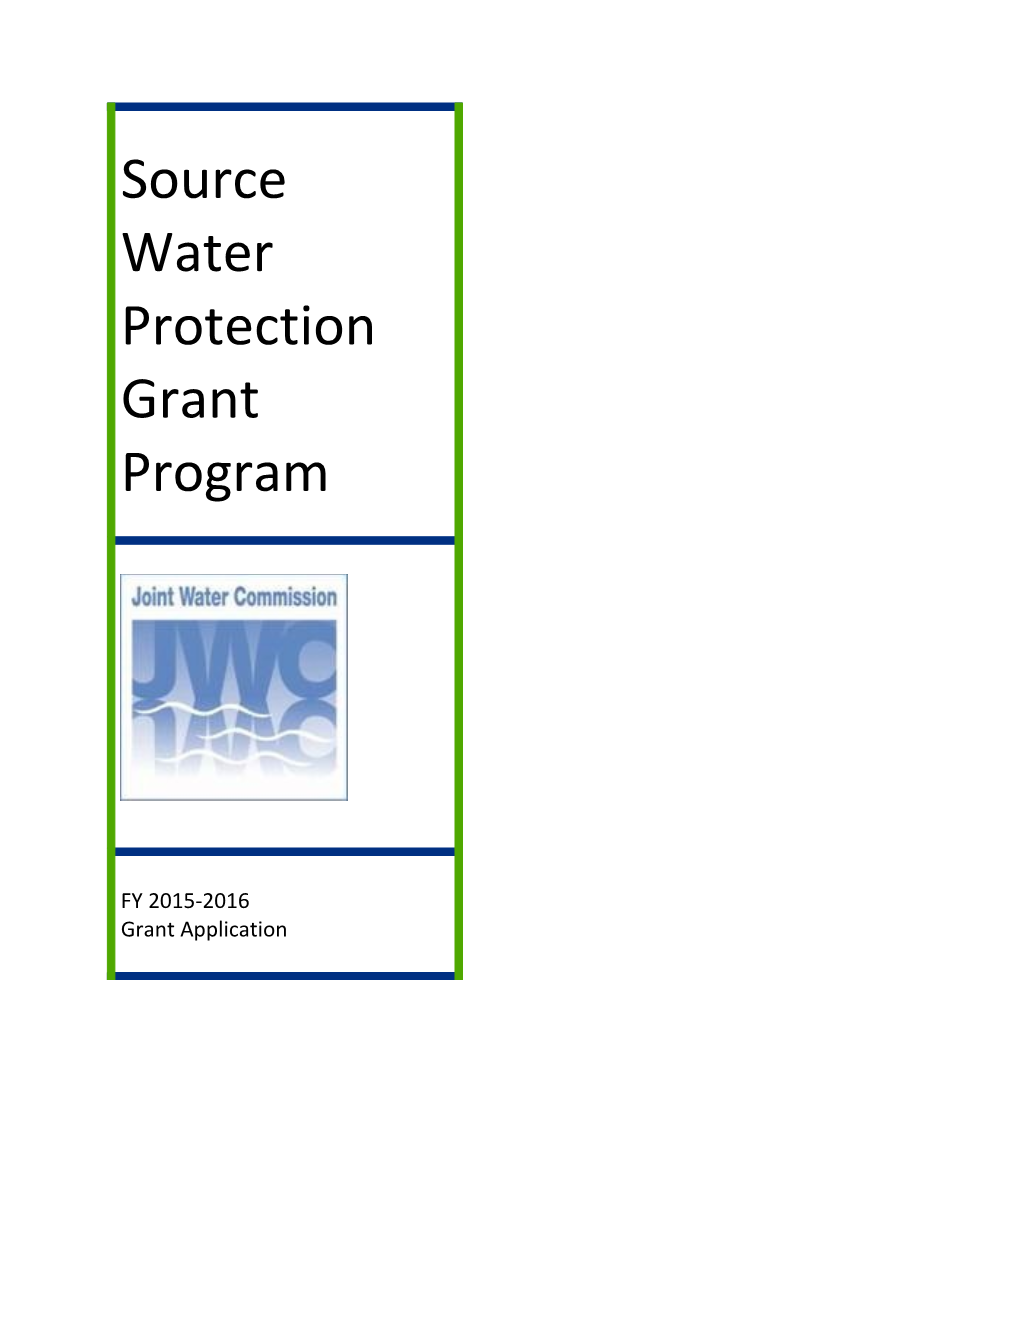 Source Water Protection Grant Program